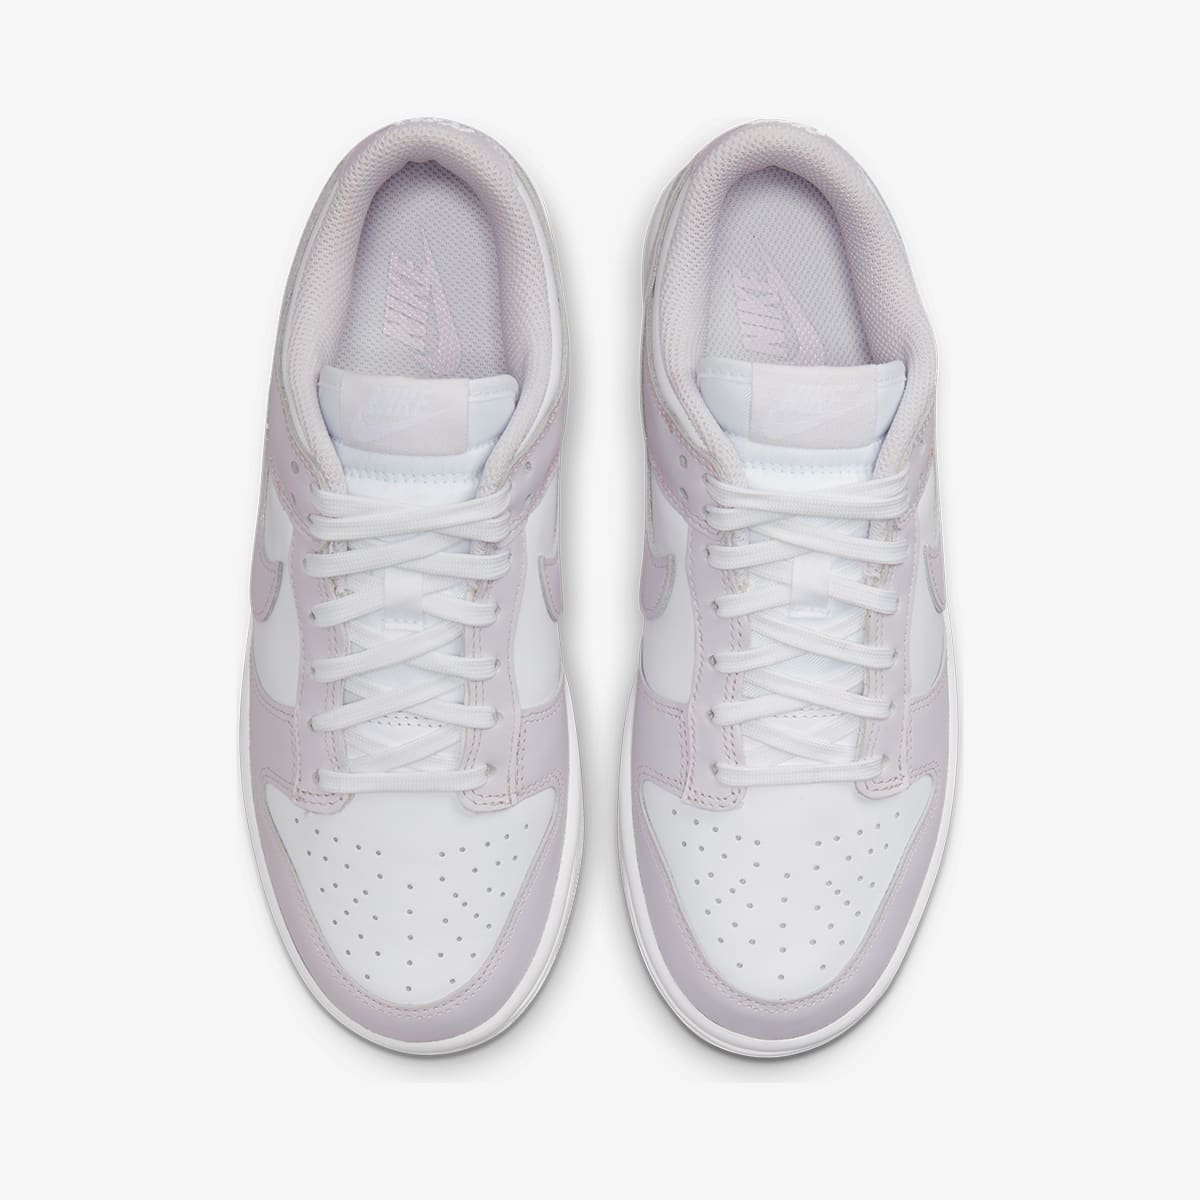 Nike Dunk Low W (White & Venice) | END. Launches